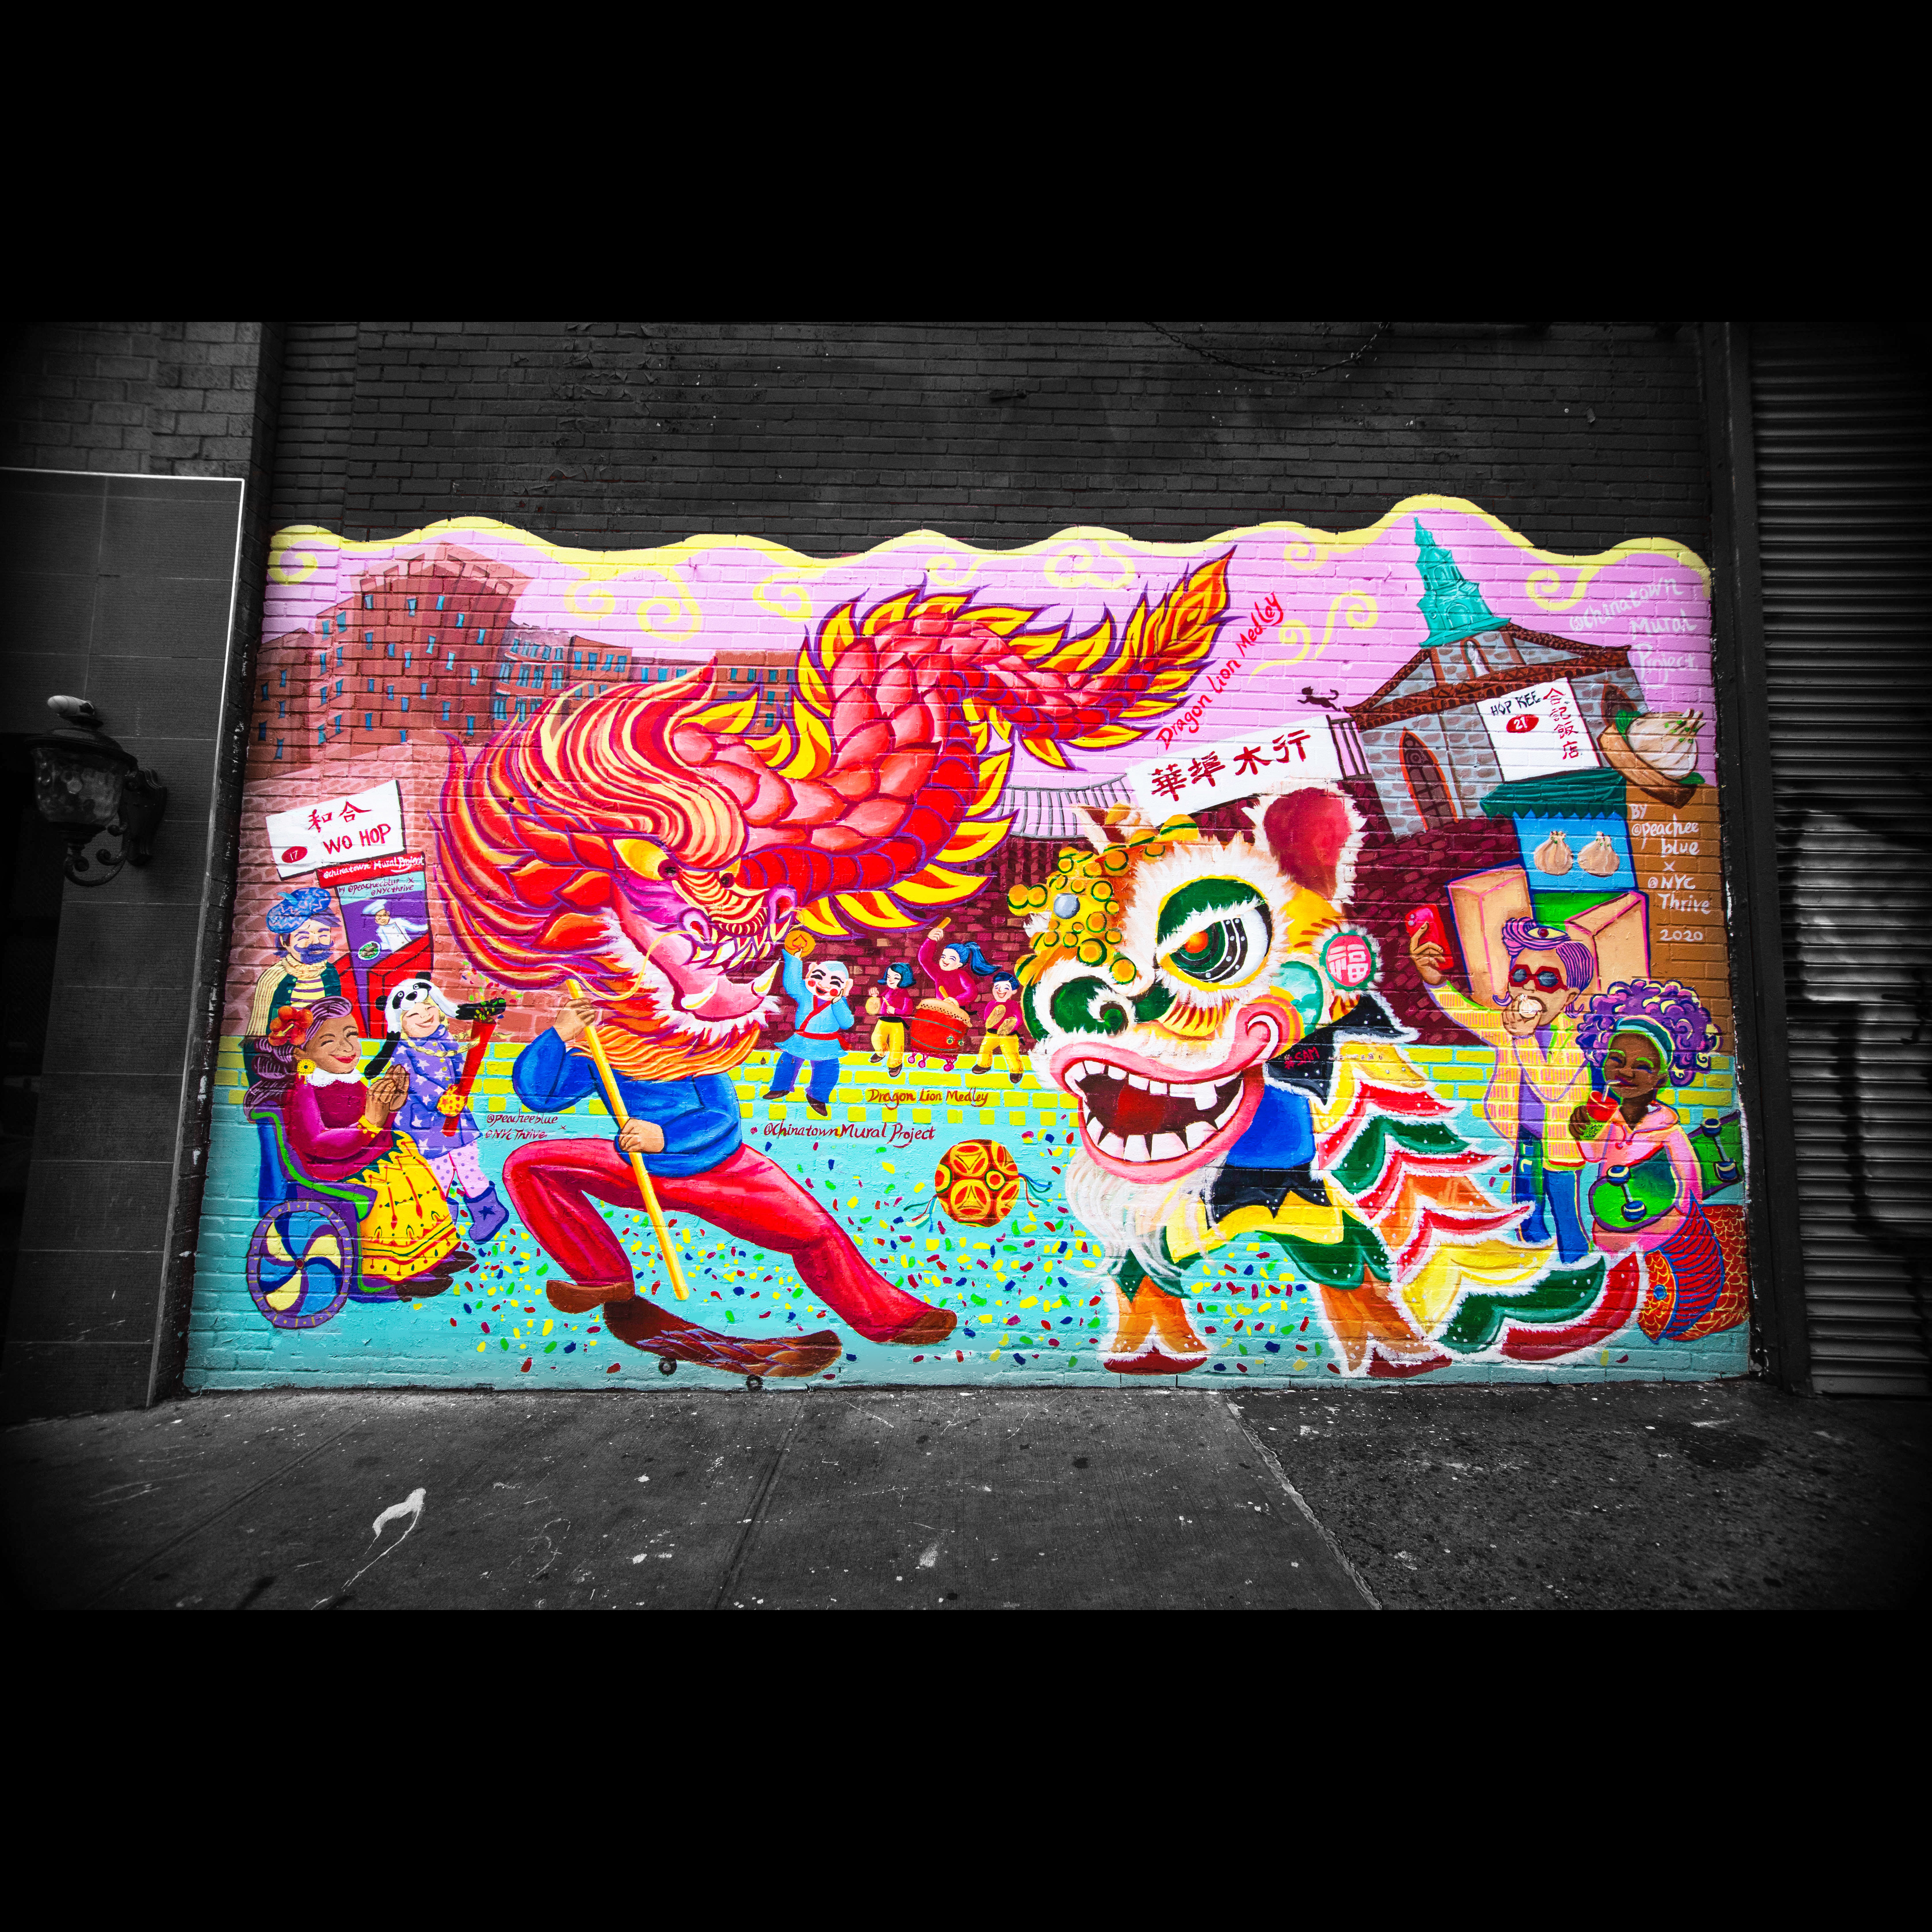 Peach Tao, Chinatown Mural Project, nycthrive&mdash;"Dragon Lion Medley"